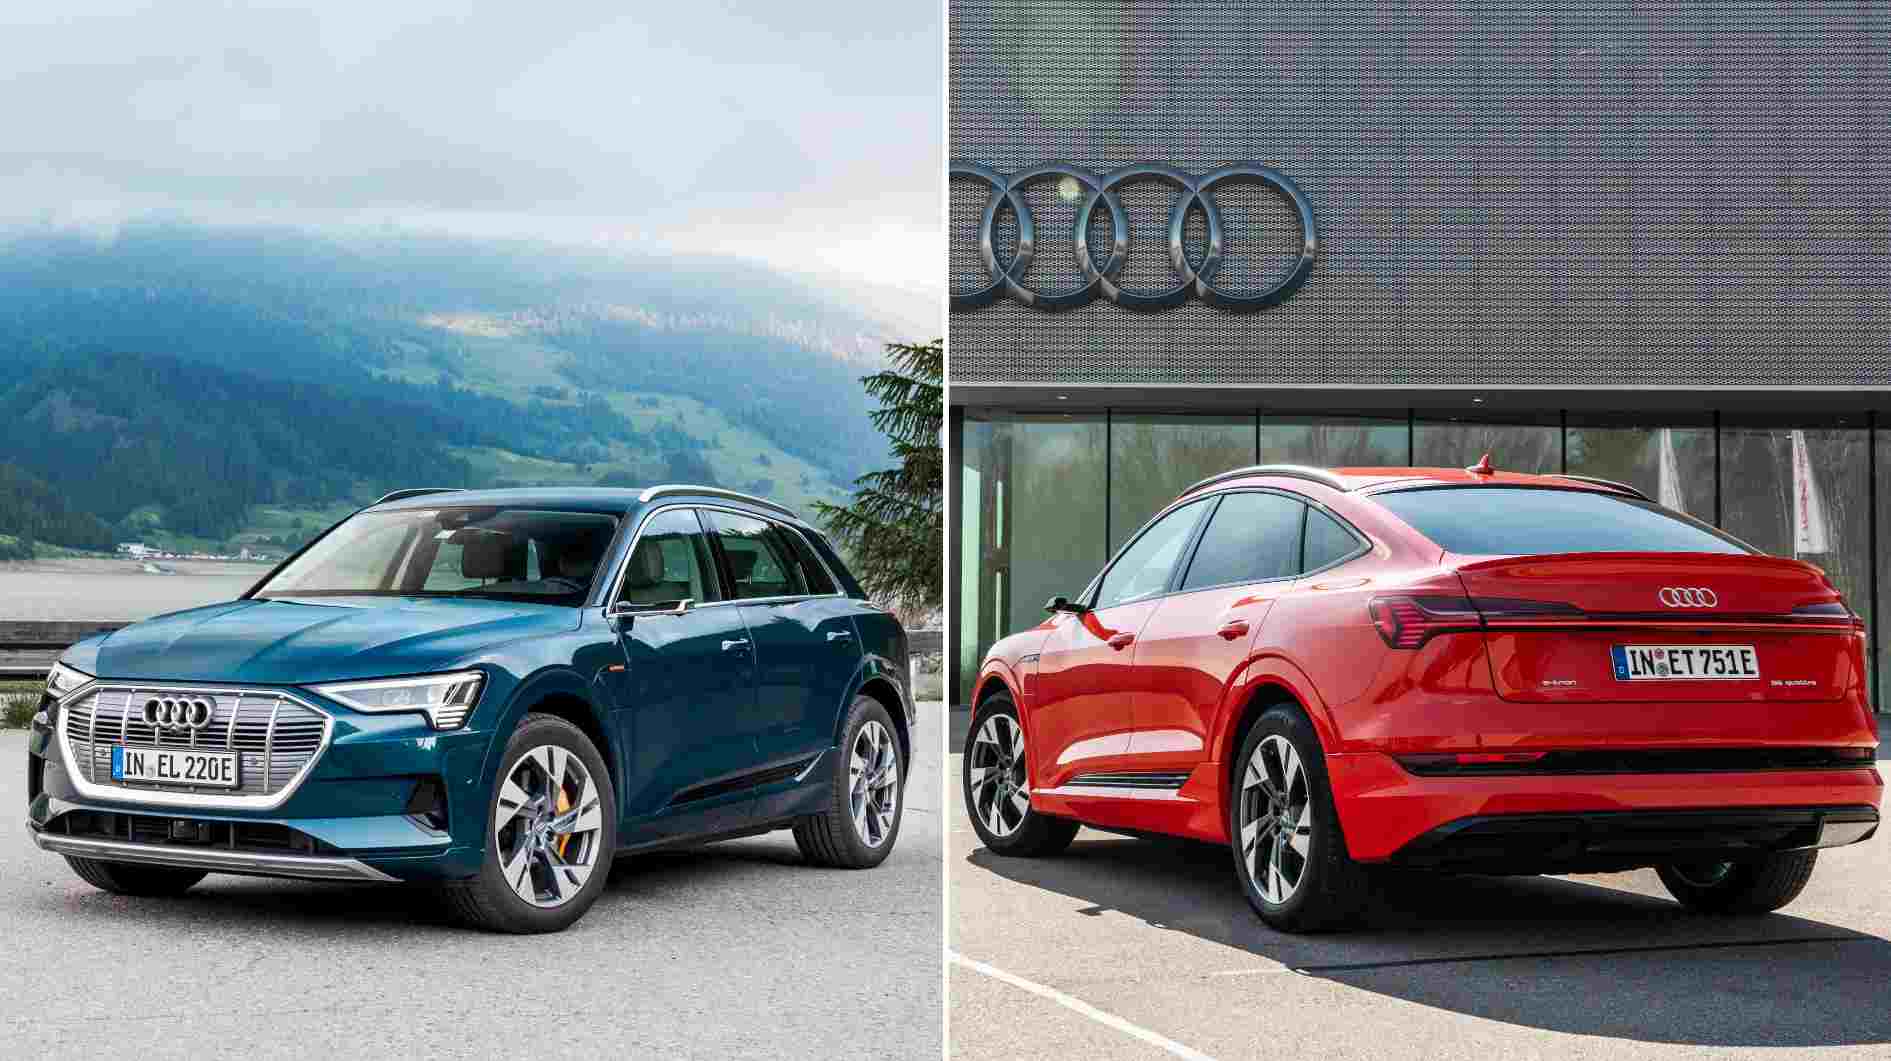 Both the standard as well as the coupe-SUV versions of the Audi e-tron will be launched in India. Image: Audi